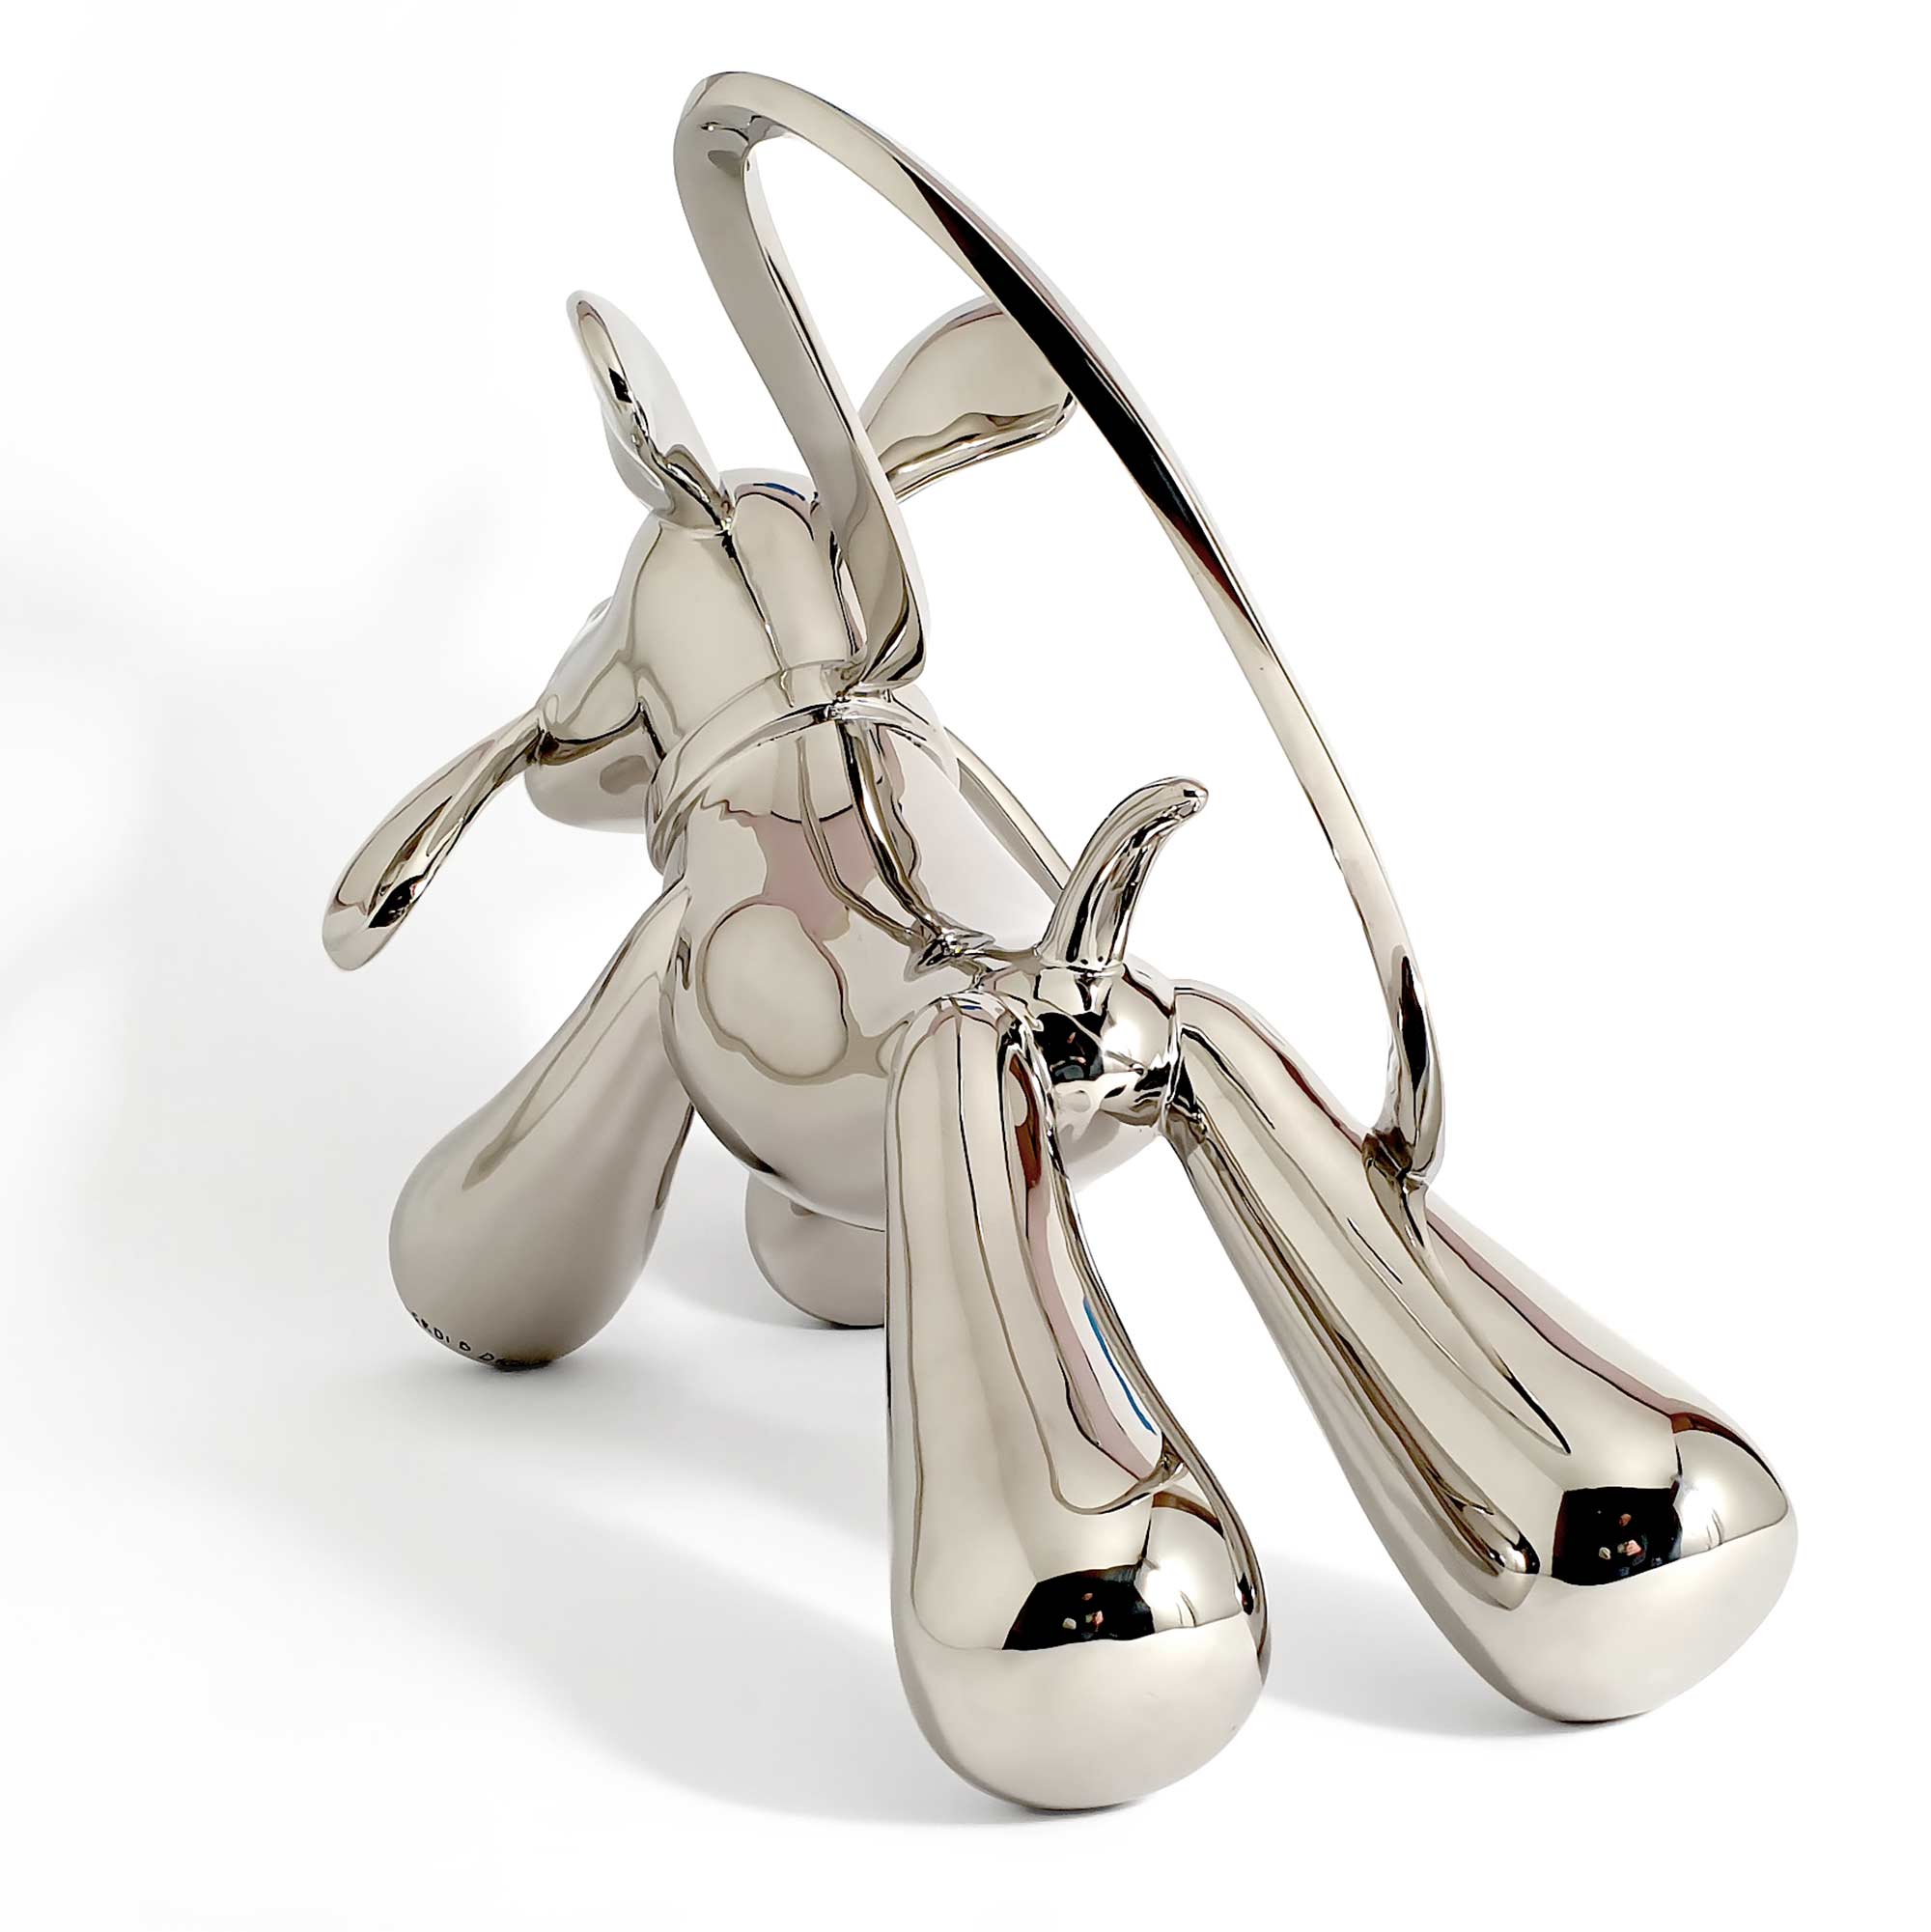 Taking the lead, dog sculpture, Mirror Polished Stainless Steel Sculpture, by artist Ferdi B Dick, back view